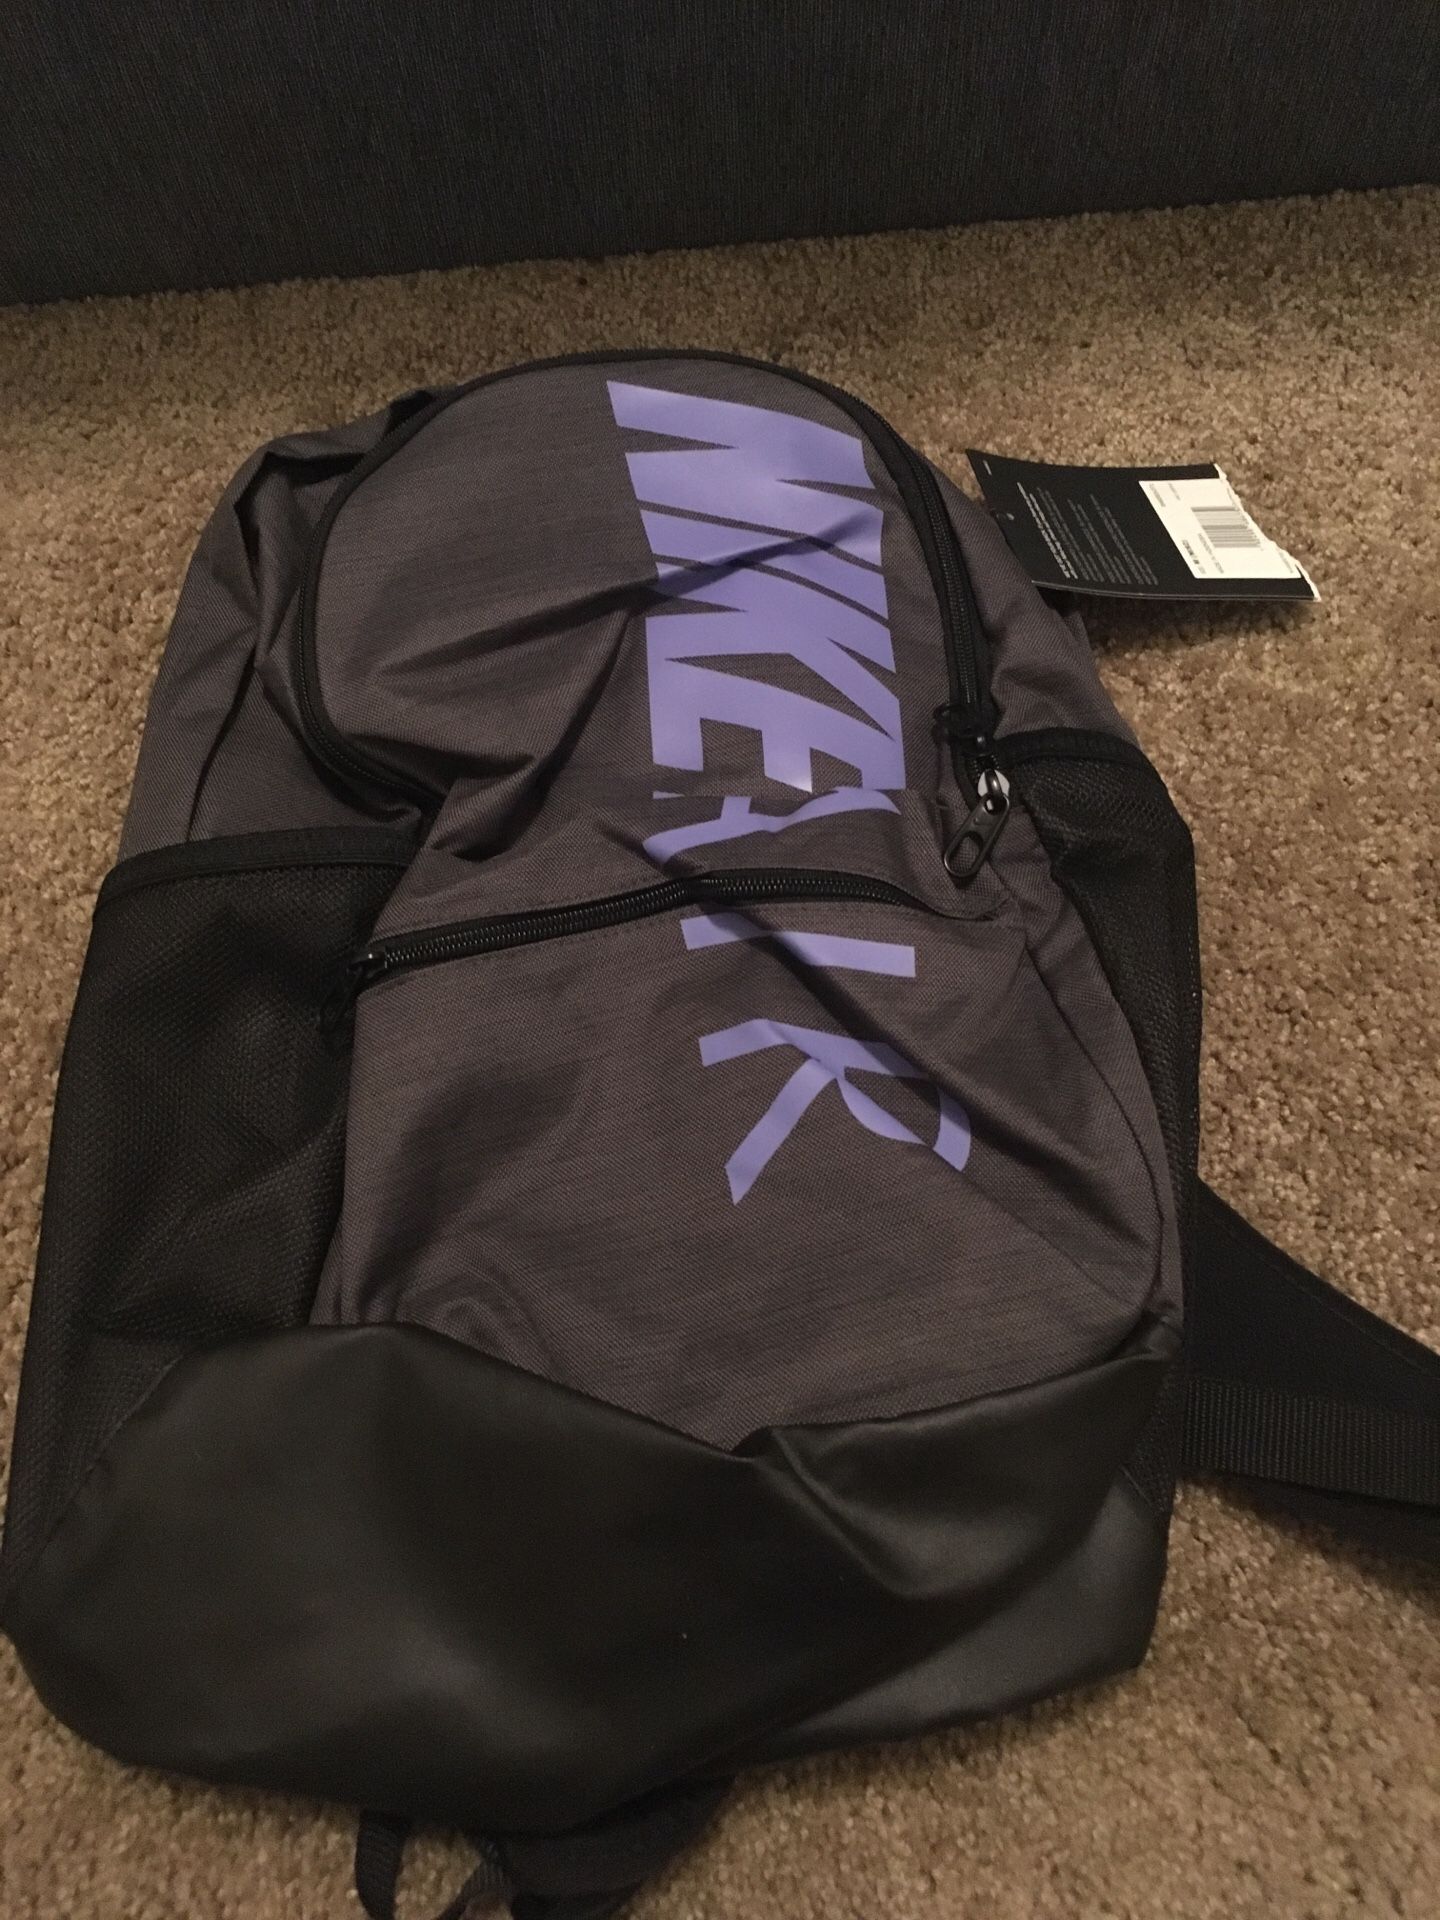 Brand new Nike backpack with tags